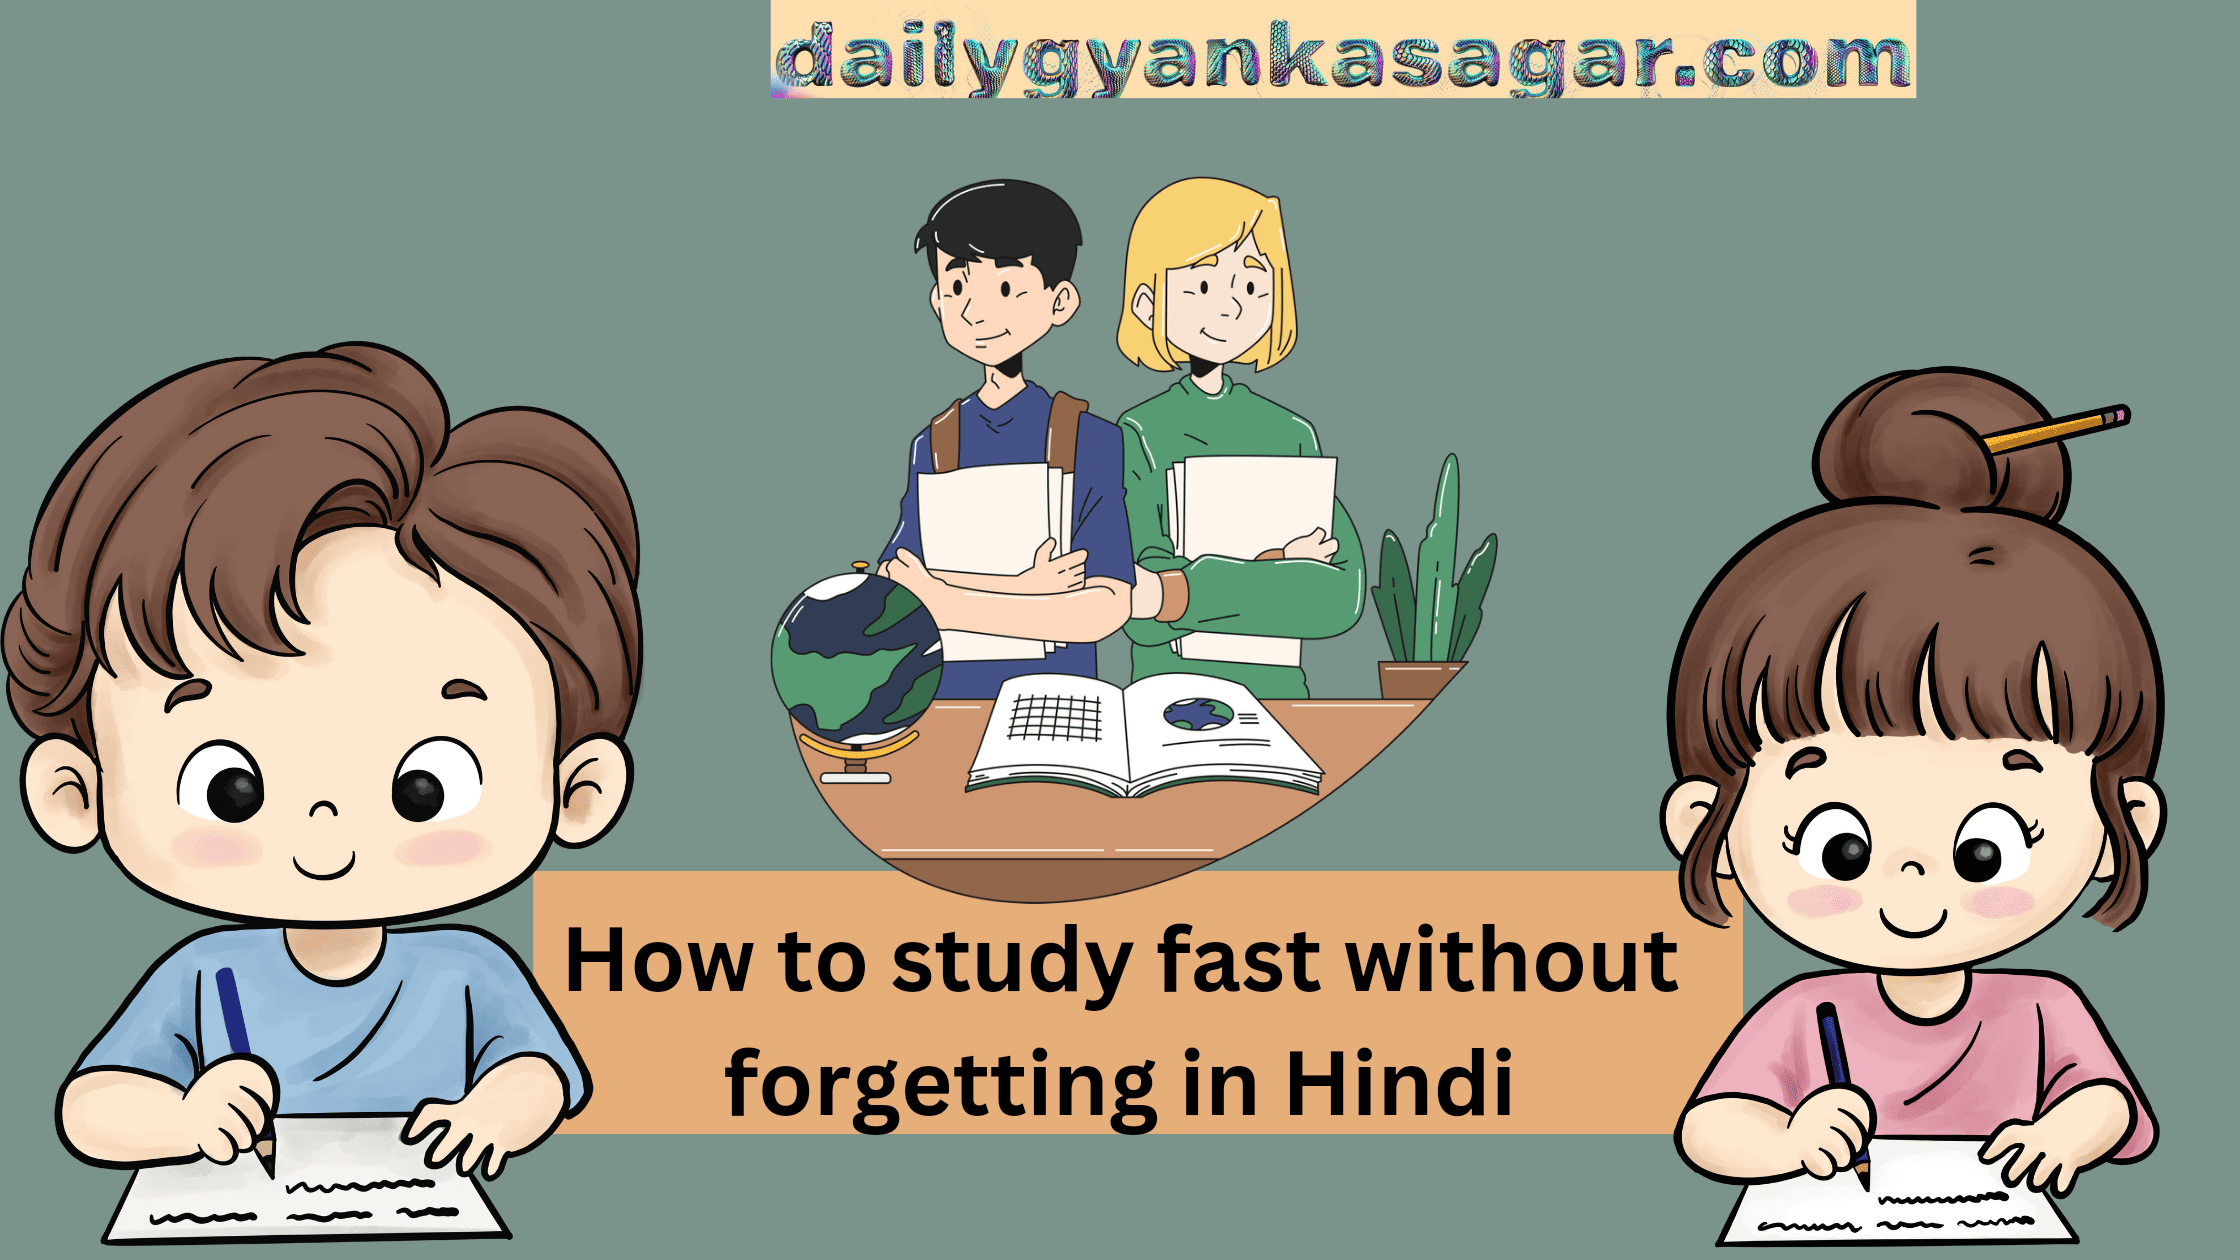 How to study fast without forgetting in Hindi